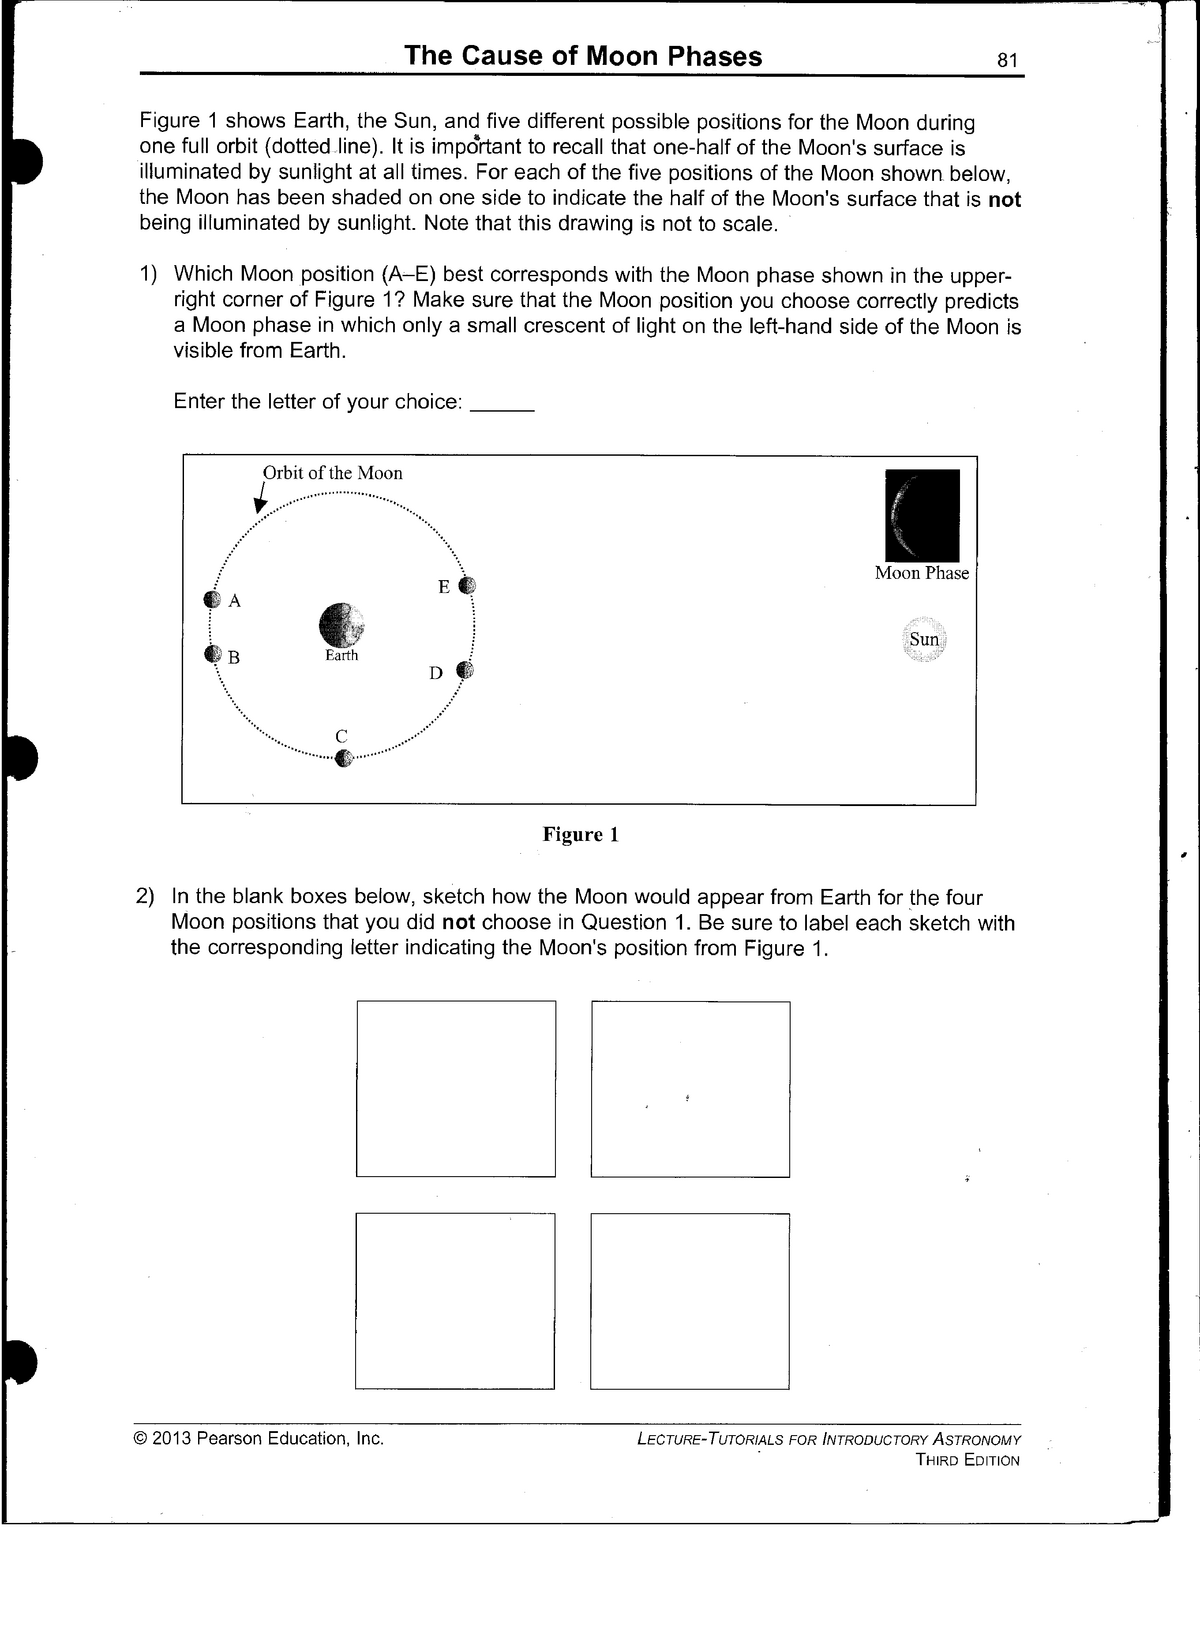 LT The Cause of Moon Phases - 20 - astronomy - StuDocu With Moon Phases Worksheet Answers